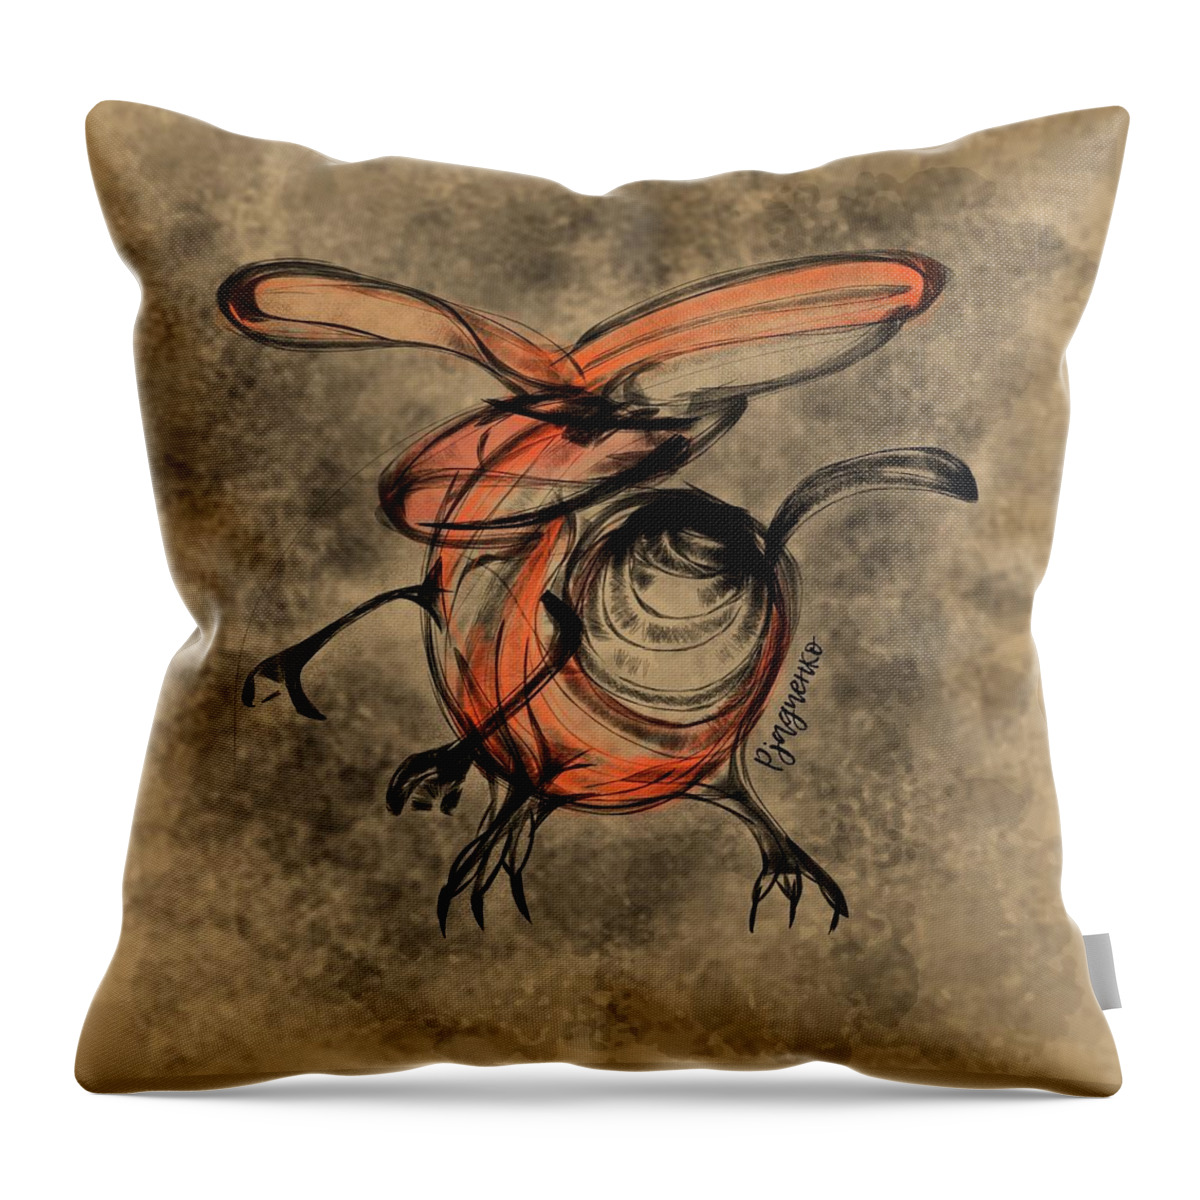 Creature Throw Pillow featuring the digital art Walk in to the storm by Ljev Rjadcenko